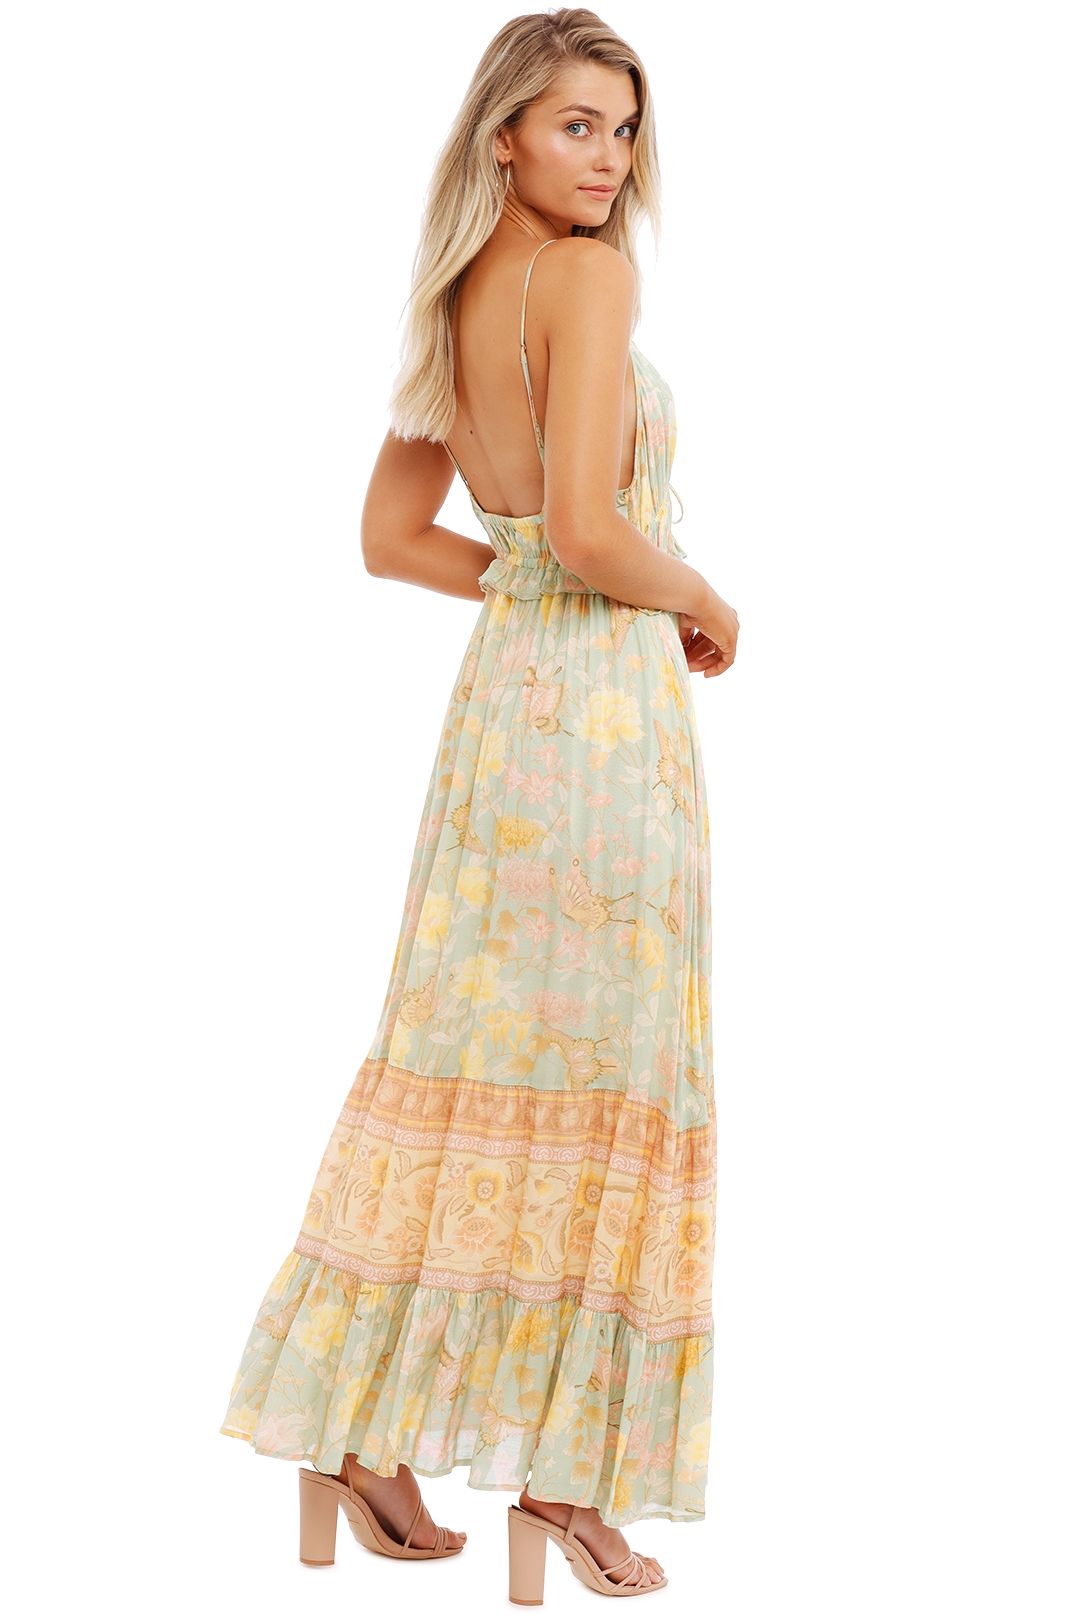 Spell Butterfly Soiree Dress Botanical maxi